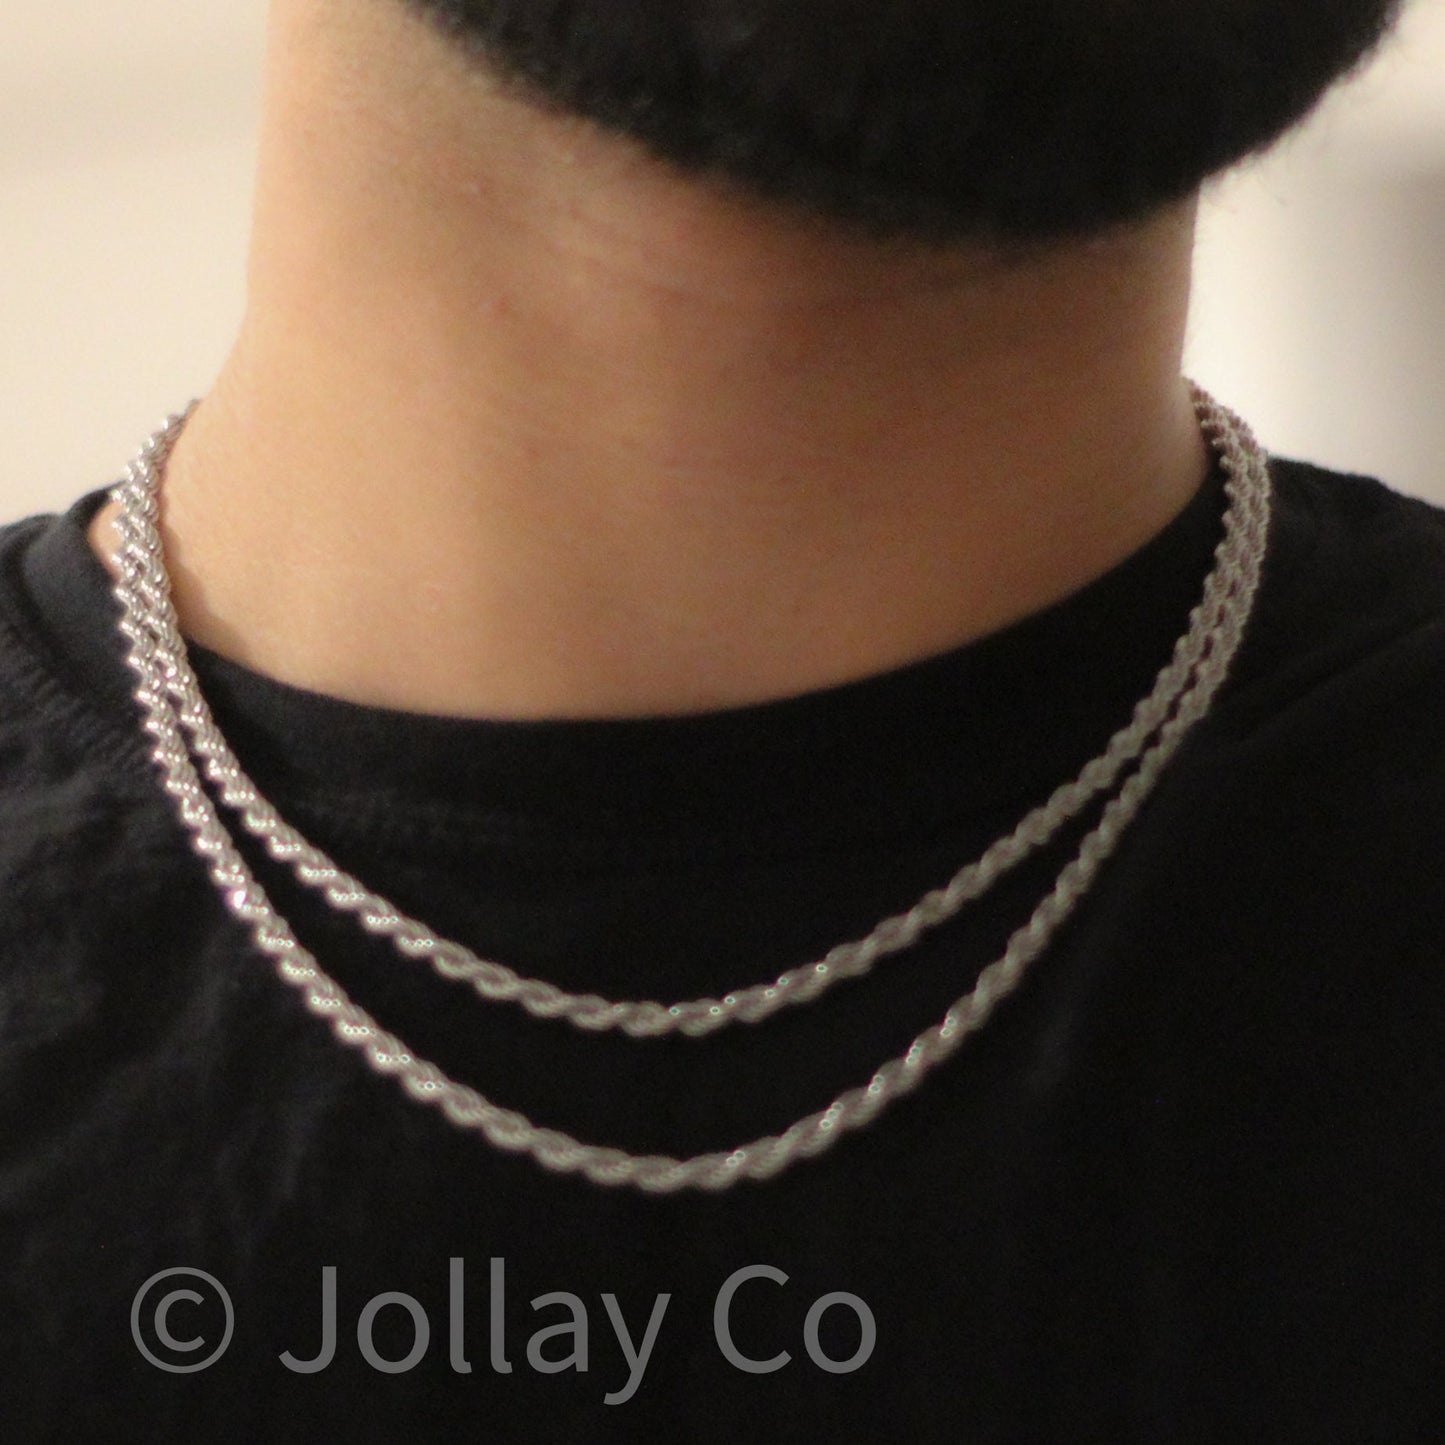 Clean White Gold Look 💧 - JOLLAY.CO